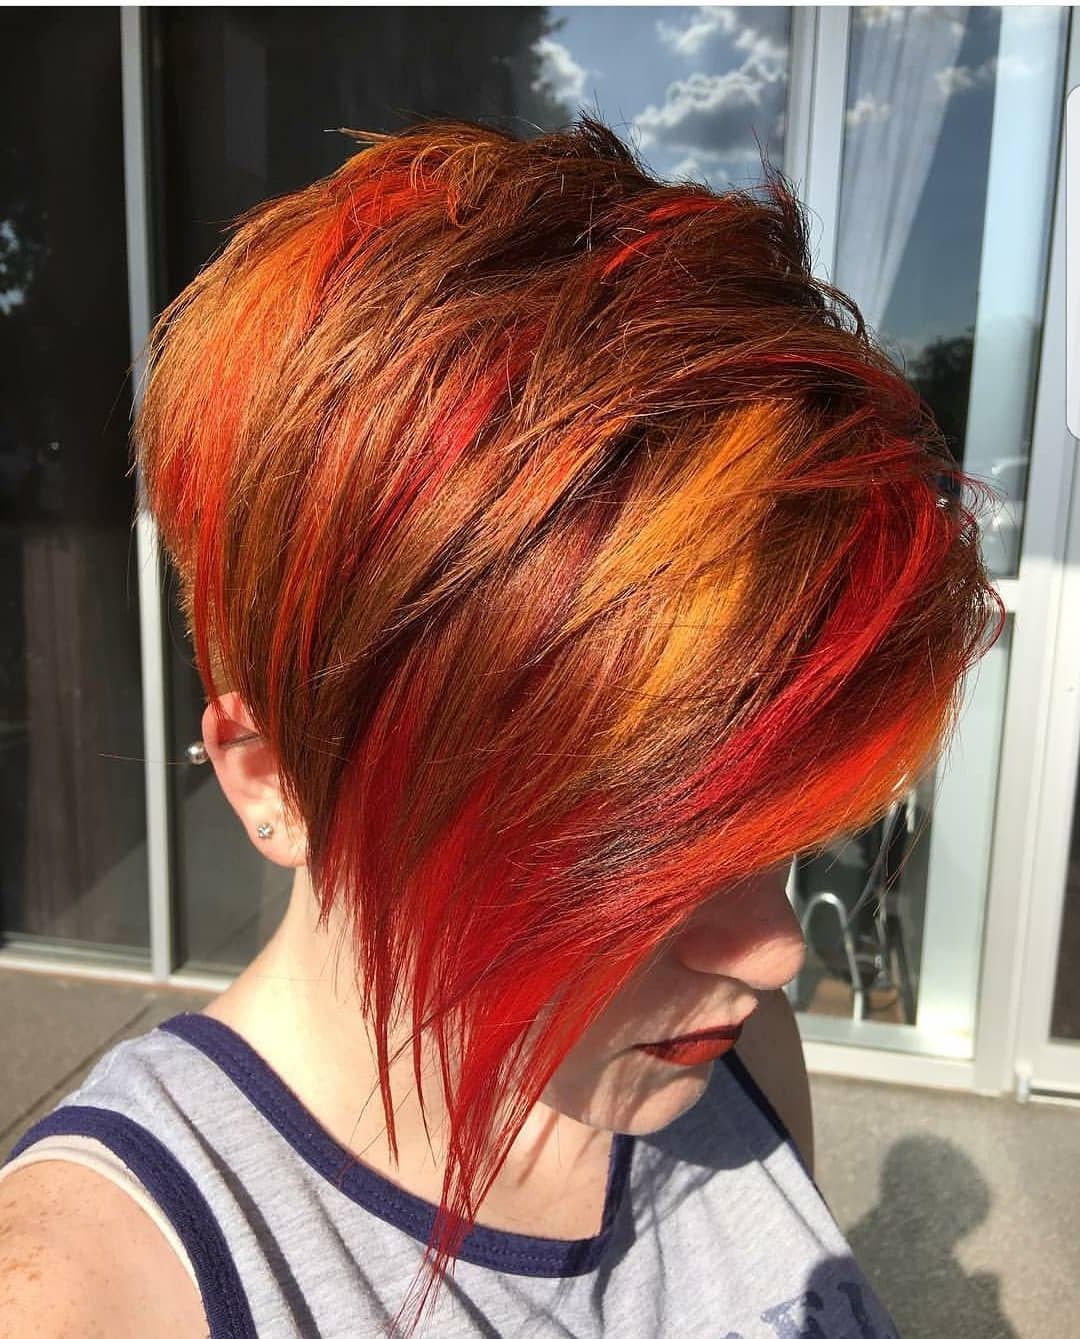 10 Beautiful Asymmetrical Short Pixie Haircuts & Hairstyles, Women With Black Choppy Pixie Hairstyles With Red Bangs (View 12 of 20)